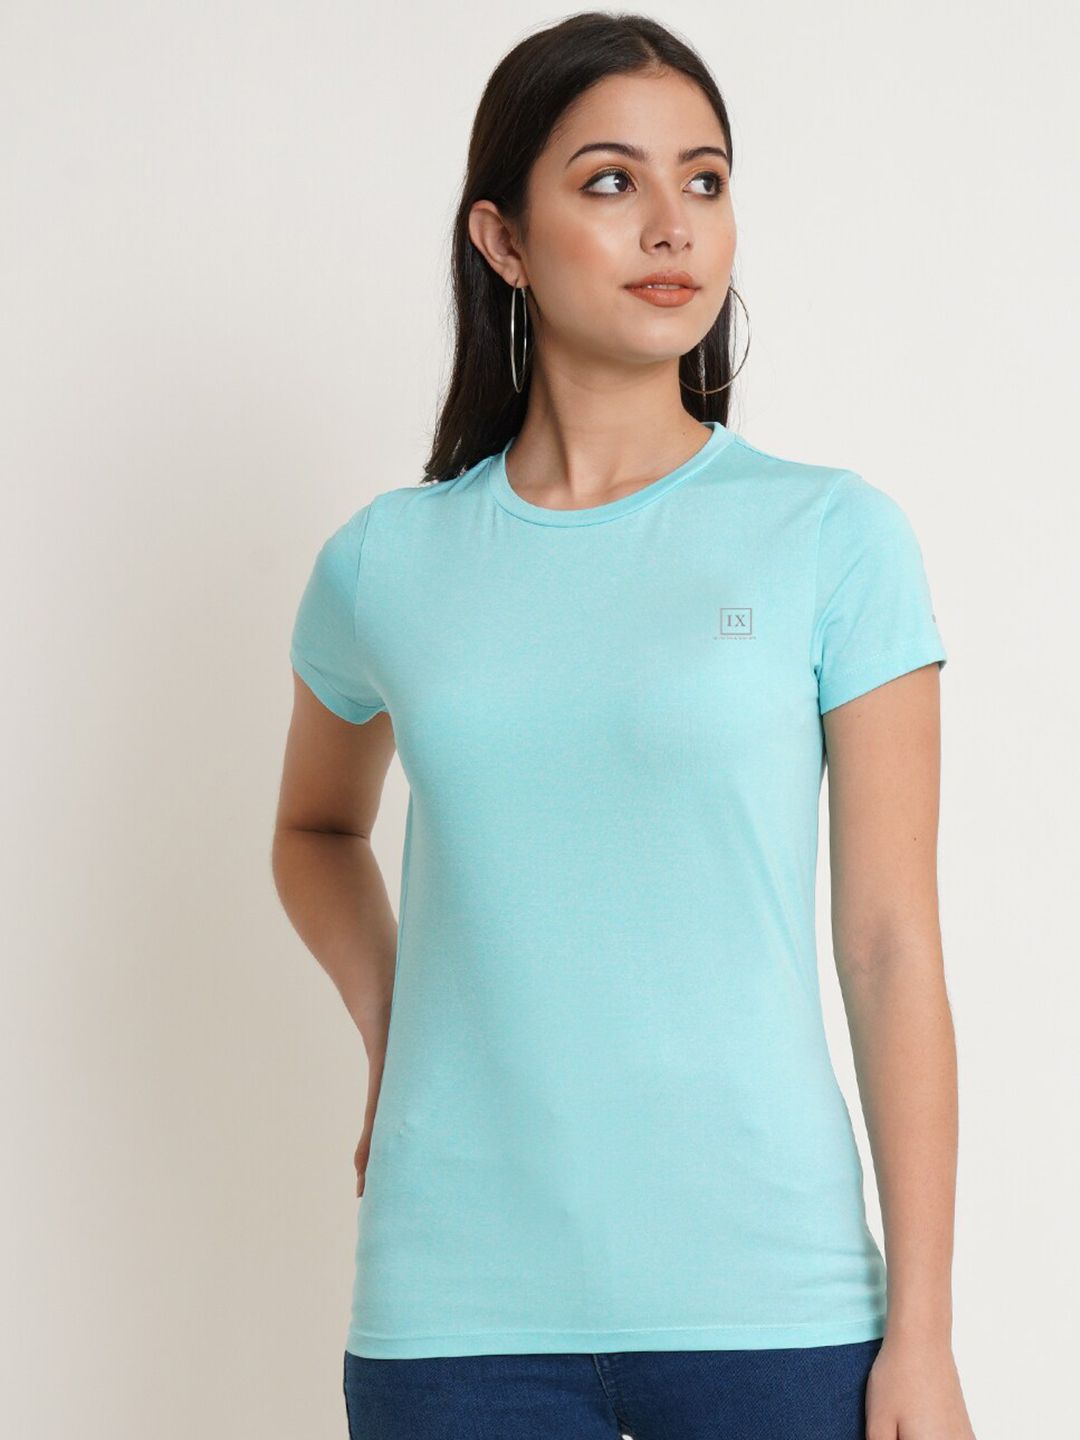 IX IMPRESSION WOMEN Turquoise Blue Solid Top Price in India